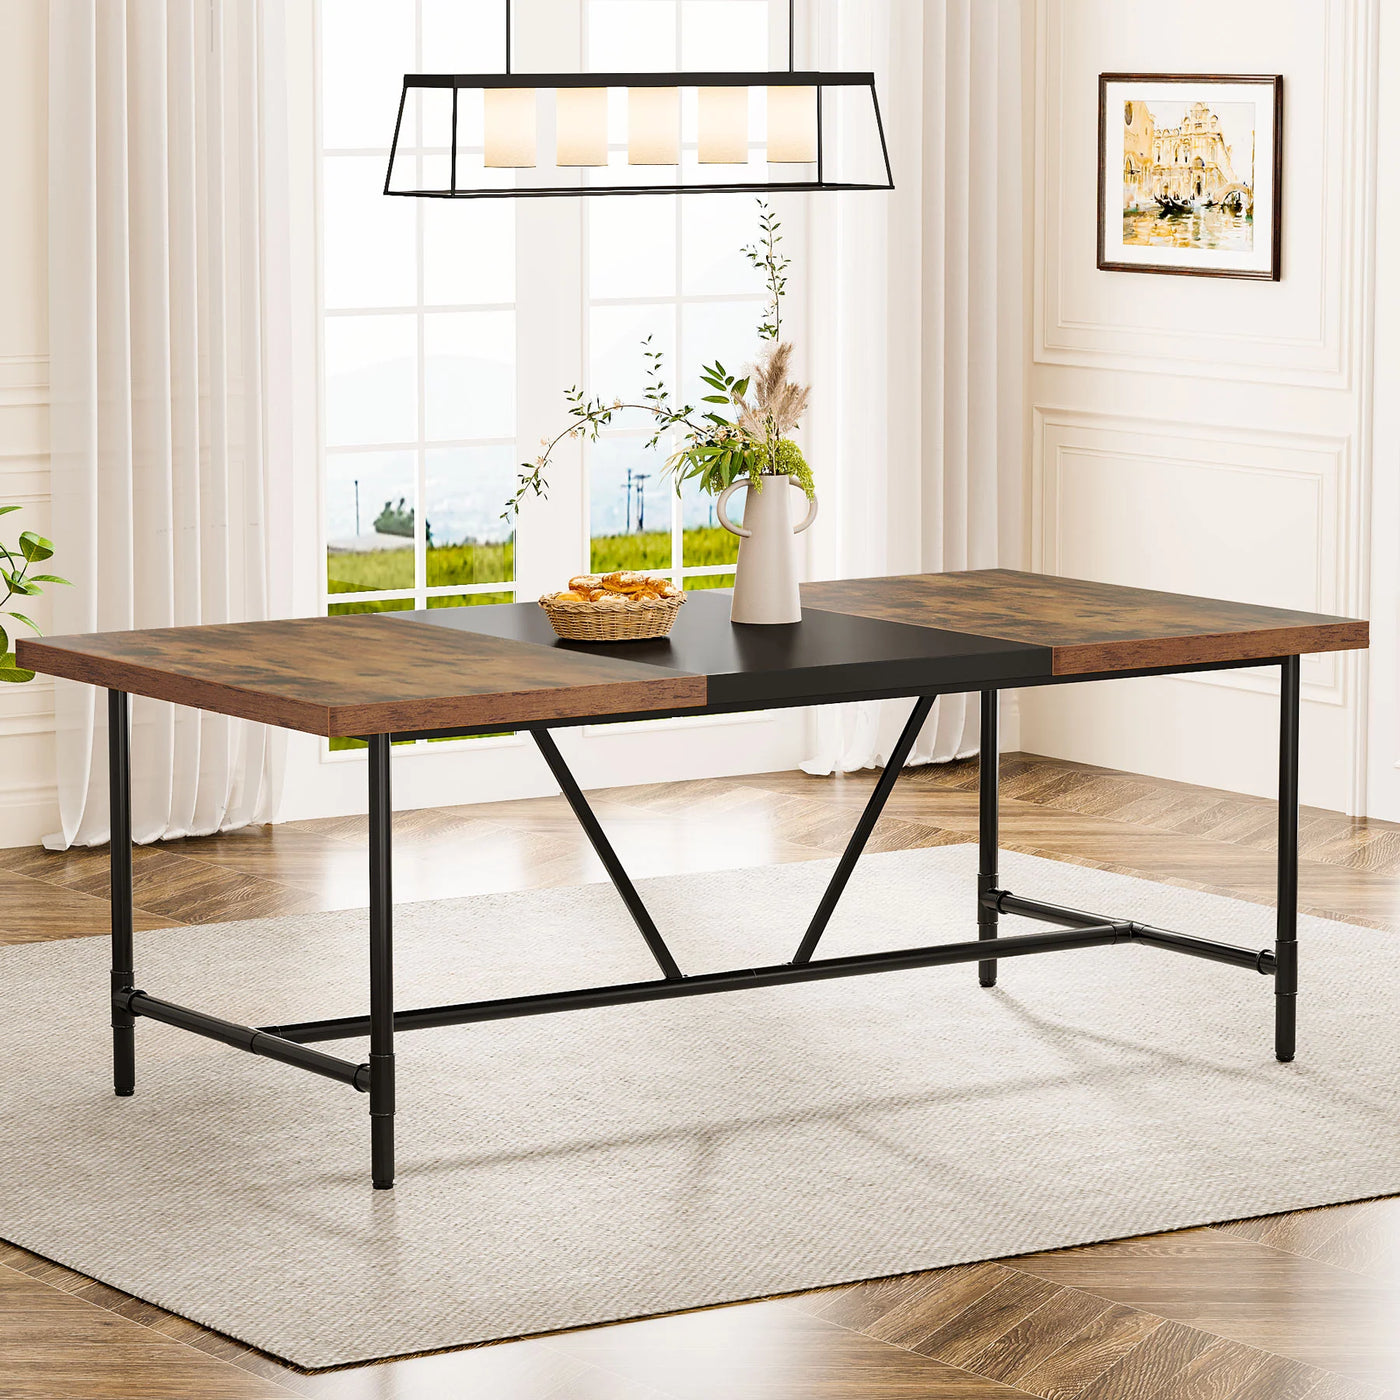 Claremont Rectangle Dining Table | Industrial Brown Black Wood Breakfast Dinner Table for 6-8 people